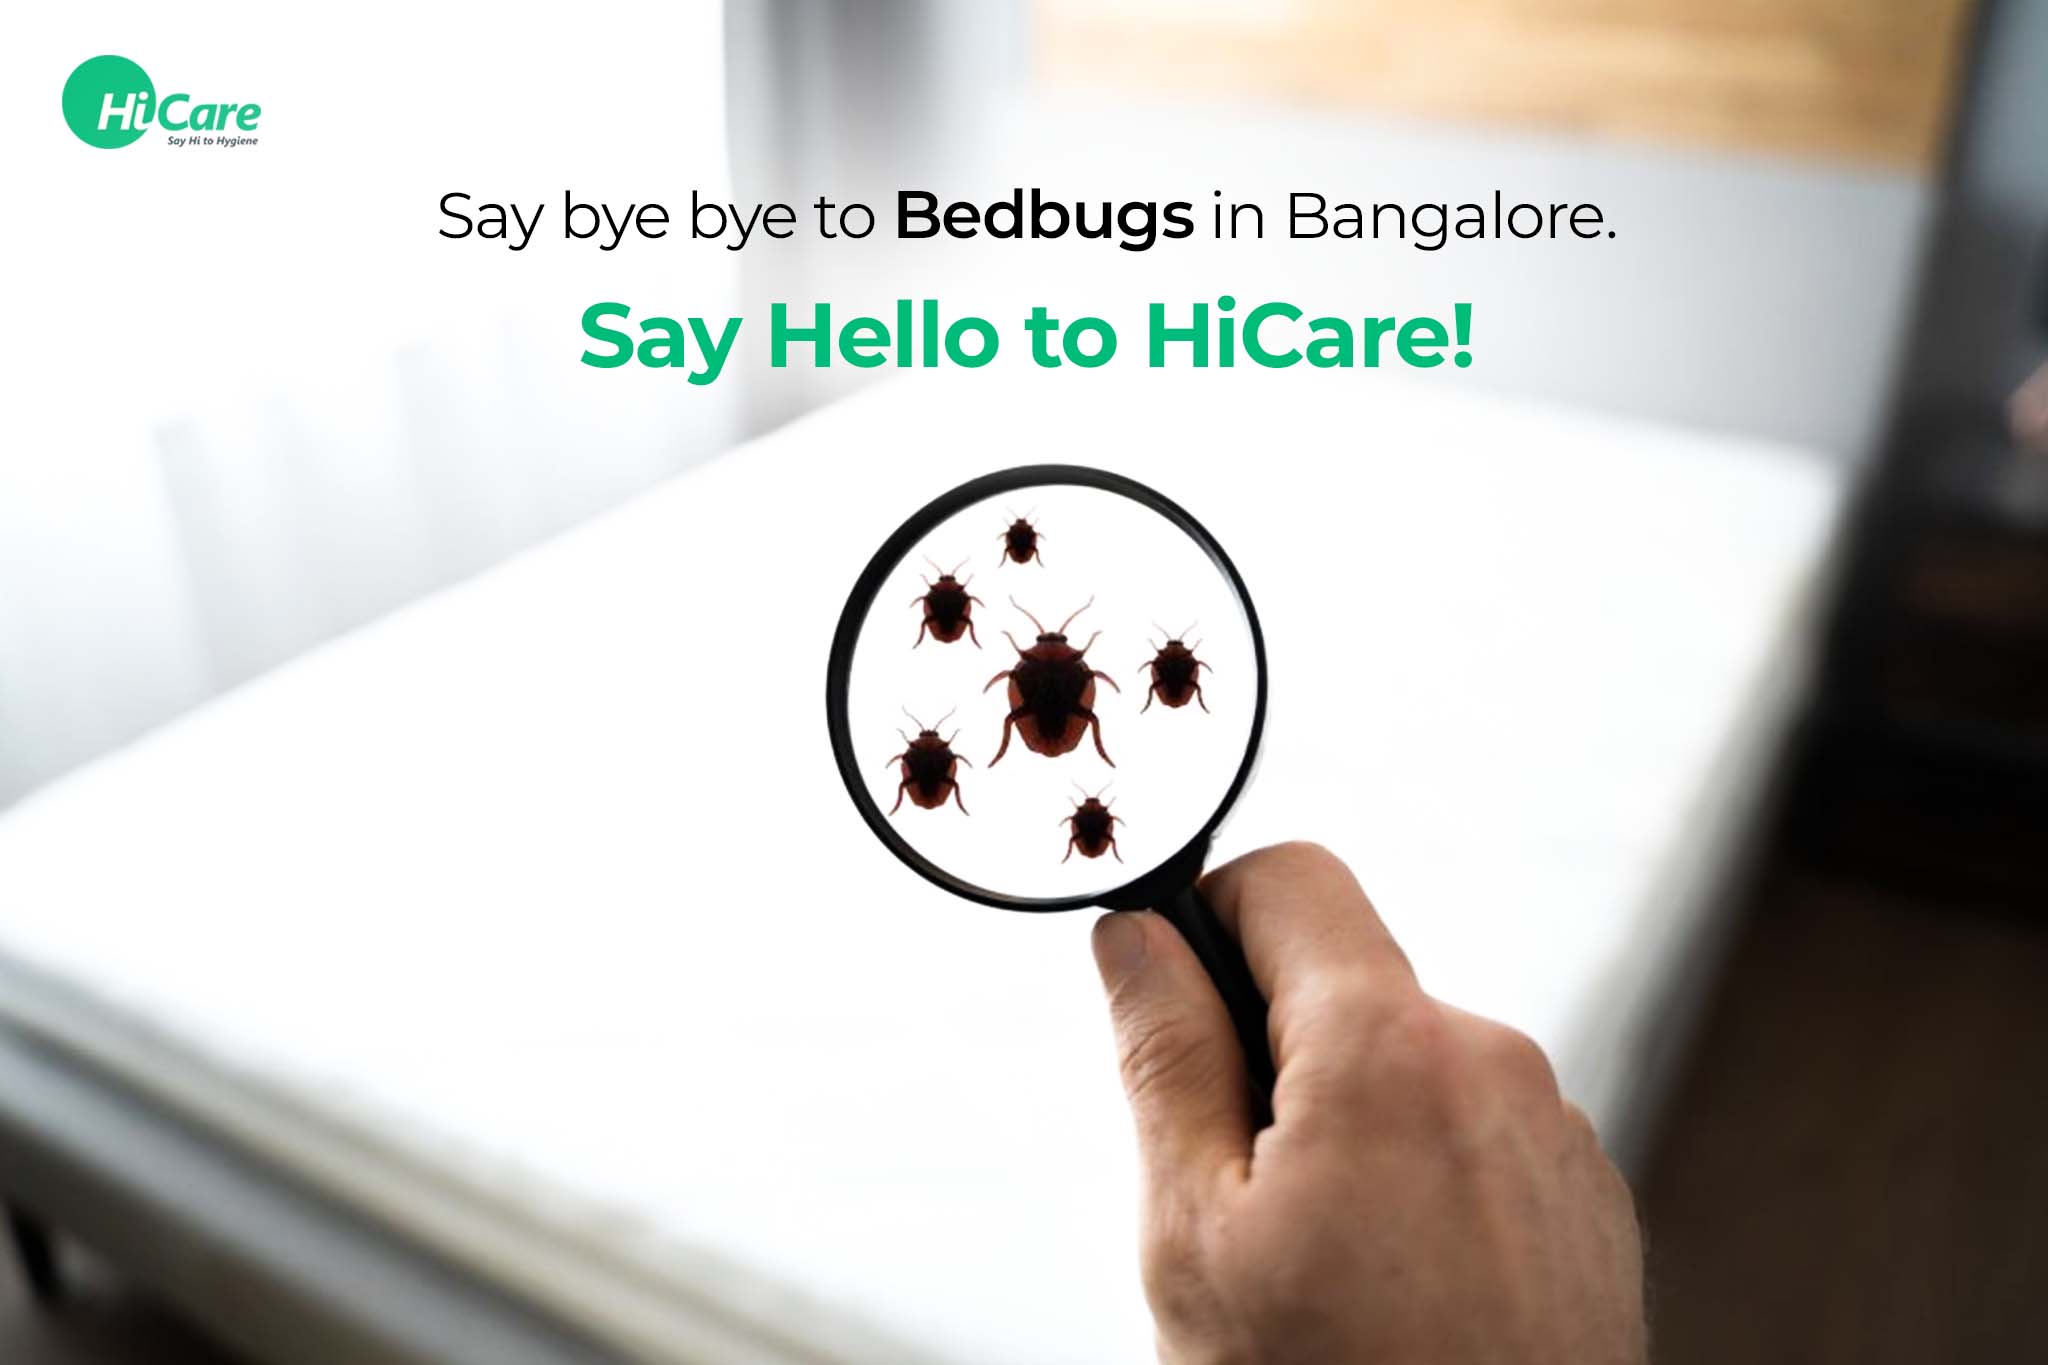 say bye bye to bedbugs in bangalore. say hello to hicare